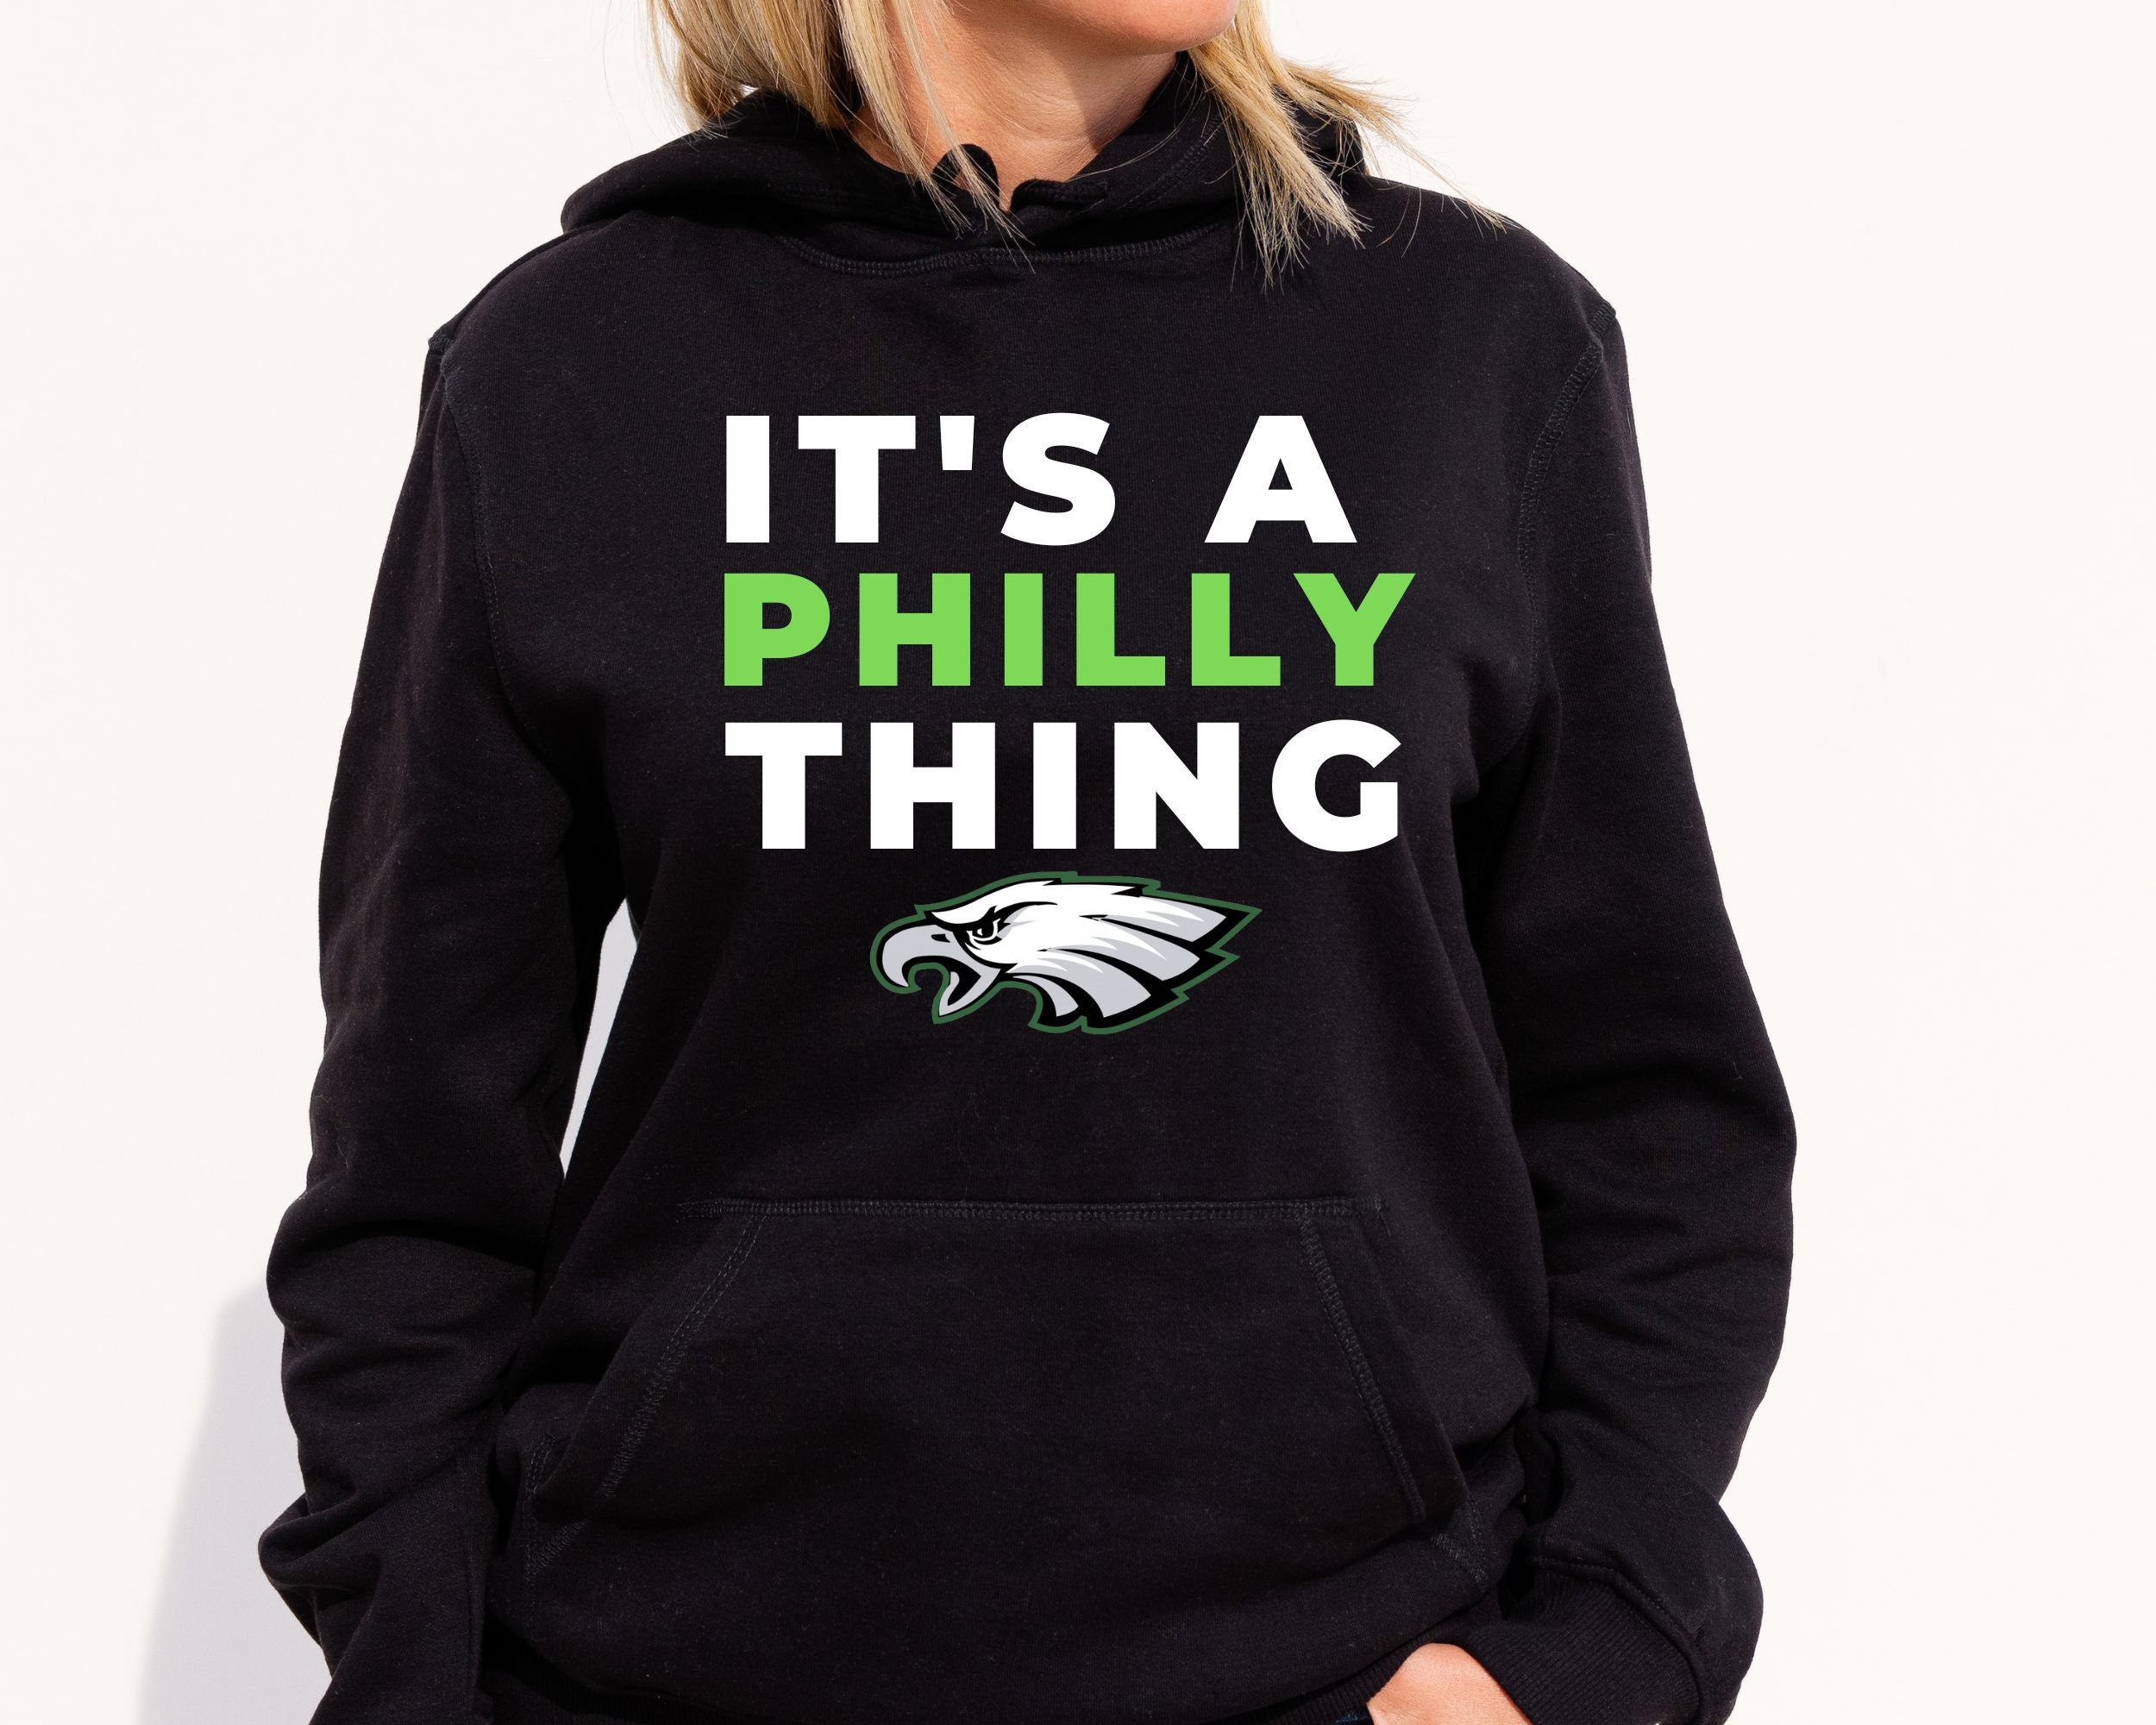 Its A Philly Thing Pngtrending Shirt Its A Philadelphia 